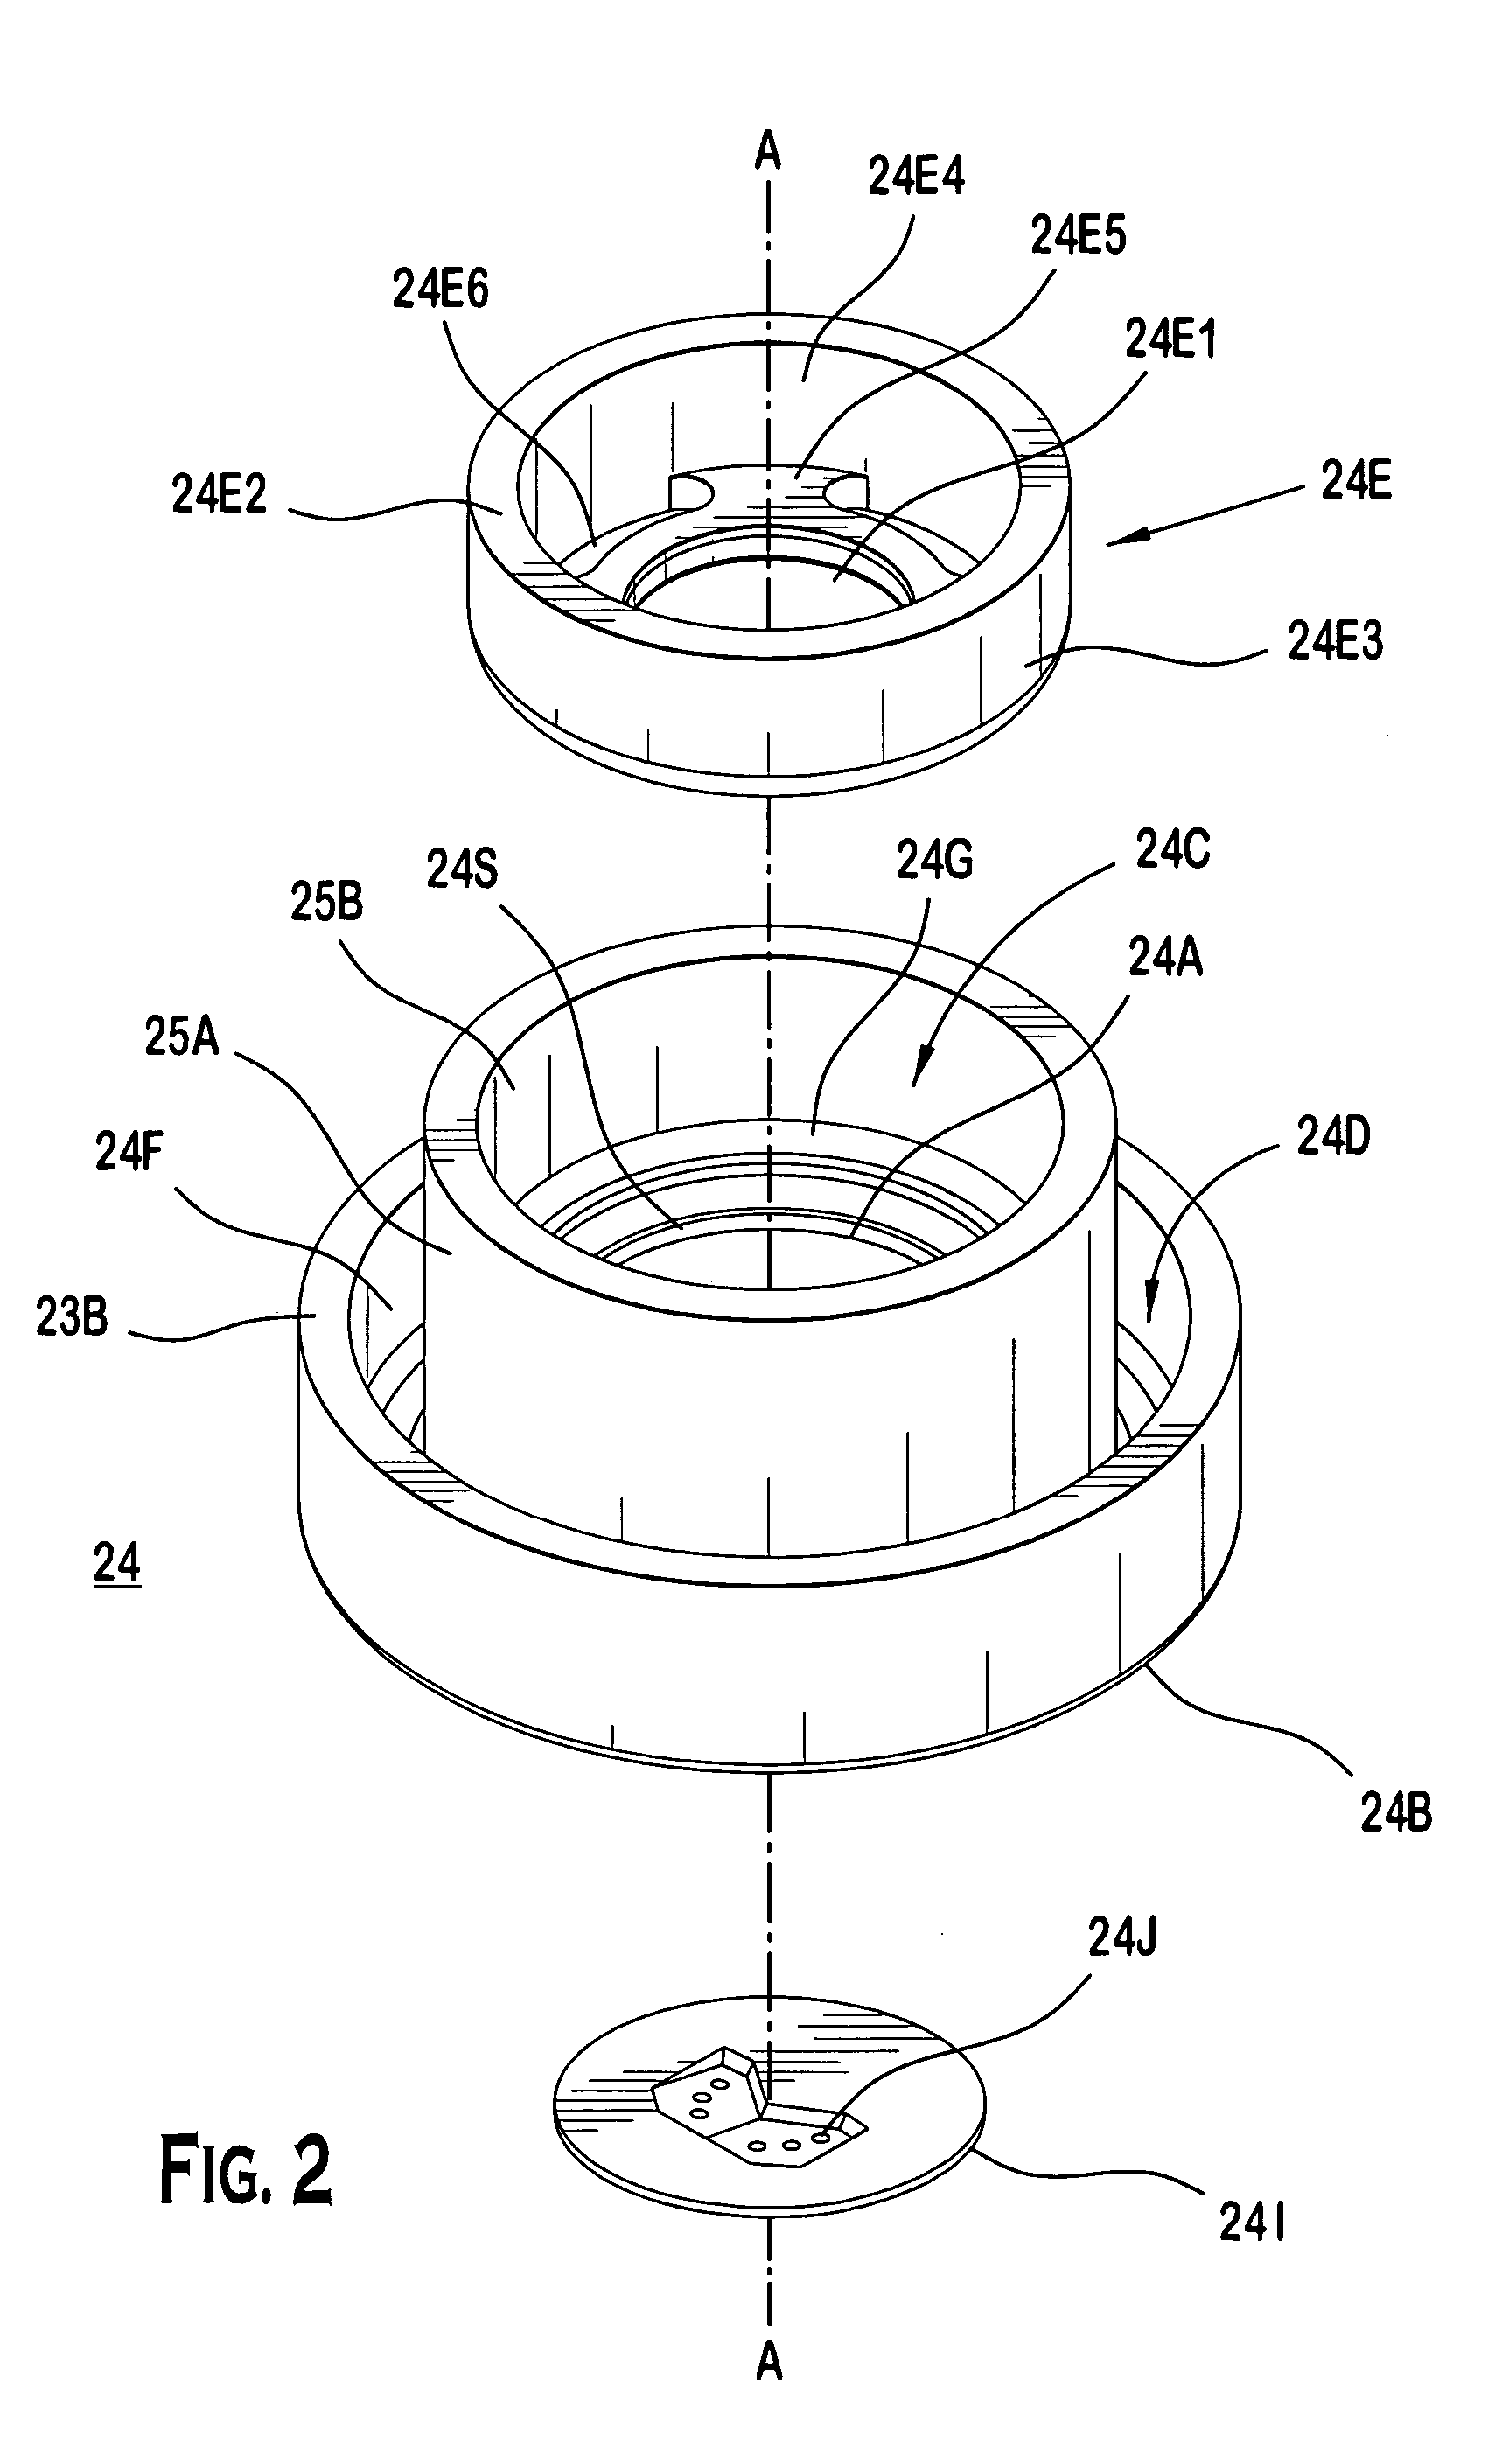 Fuel injector with a metering assembly having a seat secured to polymeric support member that is secured to a polymeric housing with a guide member and a seat disposed in the polymeric support member